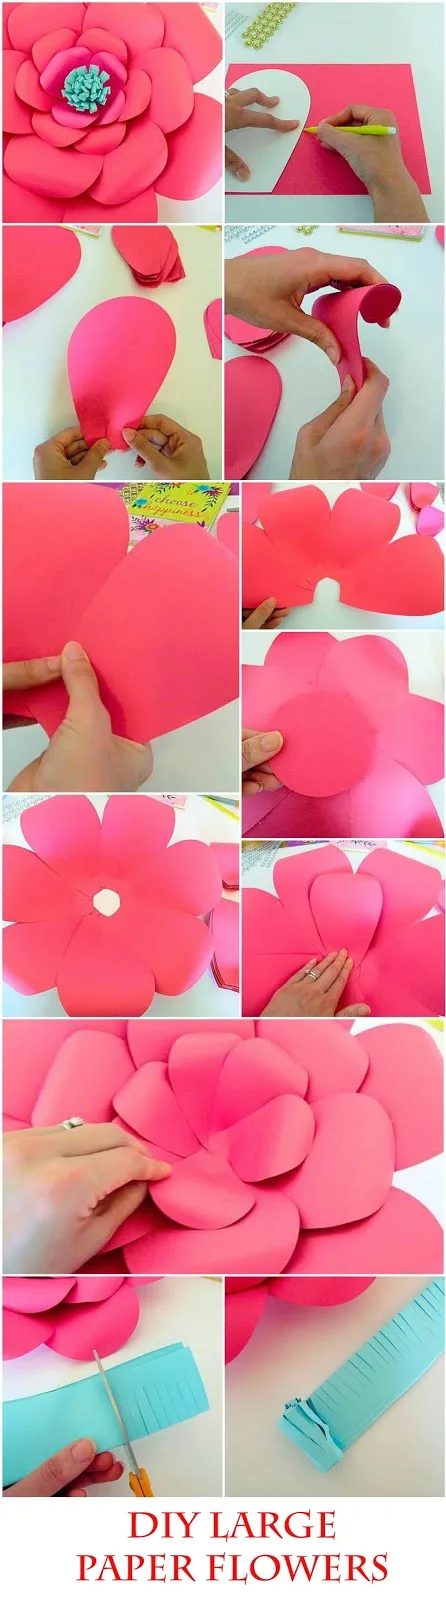 how to make paper roses step by step with pictures